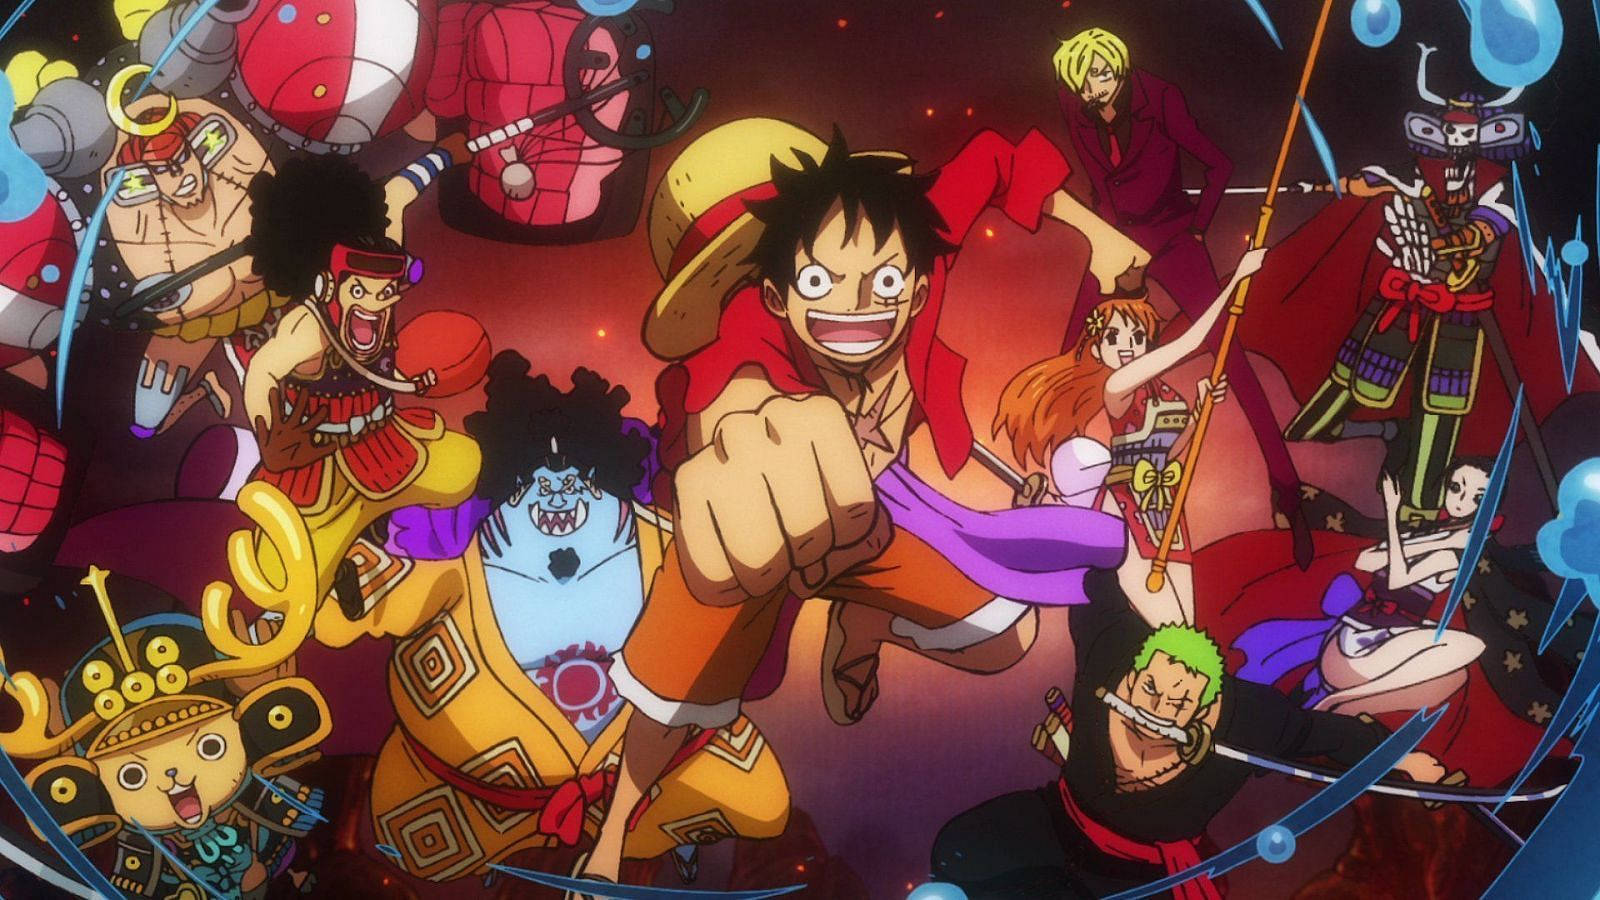 Straw Hat Pirates From One Piece Wallpaper